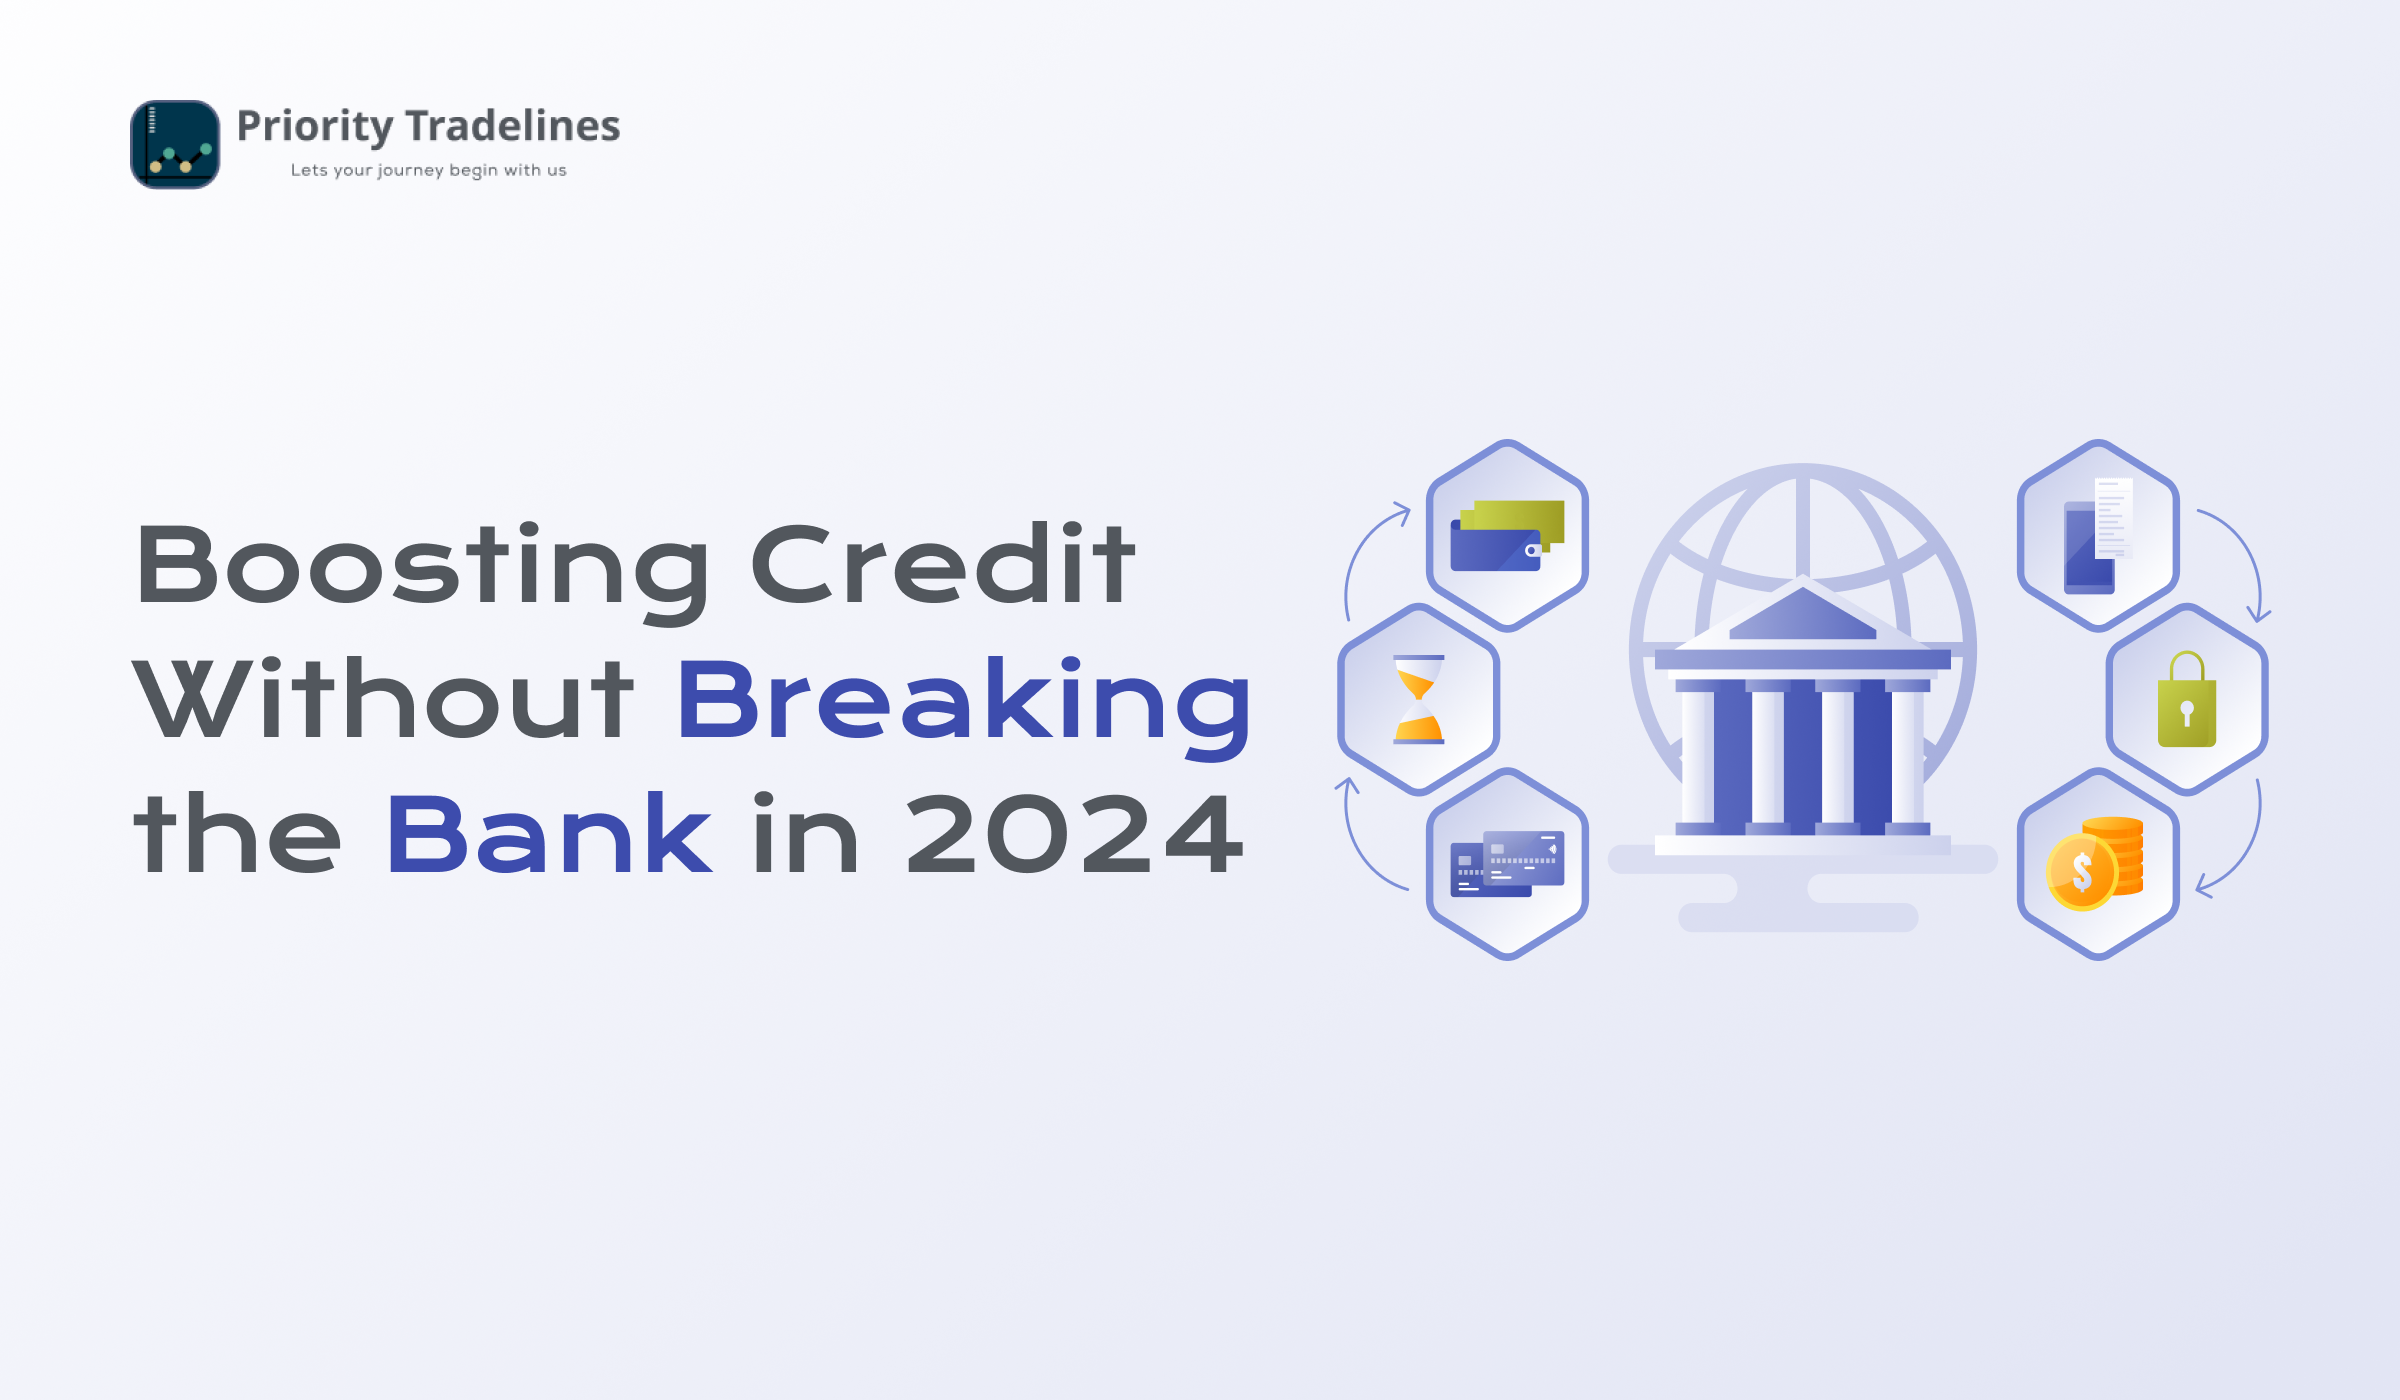 Boosting Credit Without Breaking the Bank in 2024